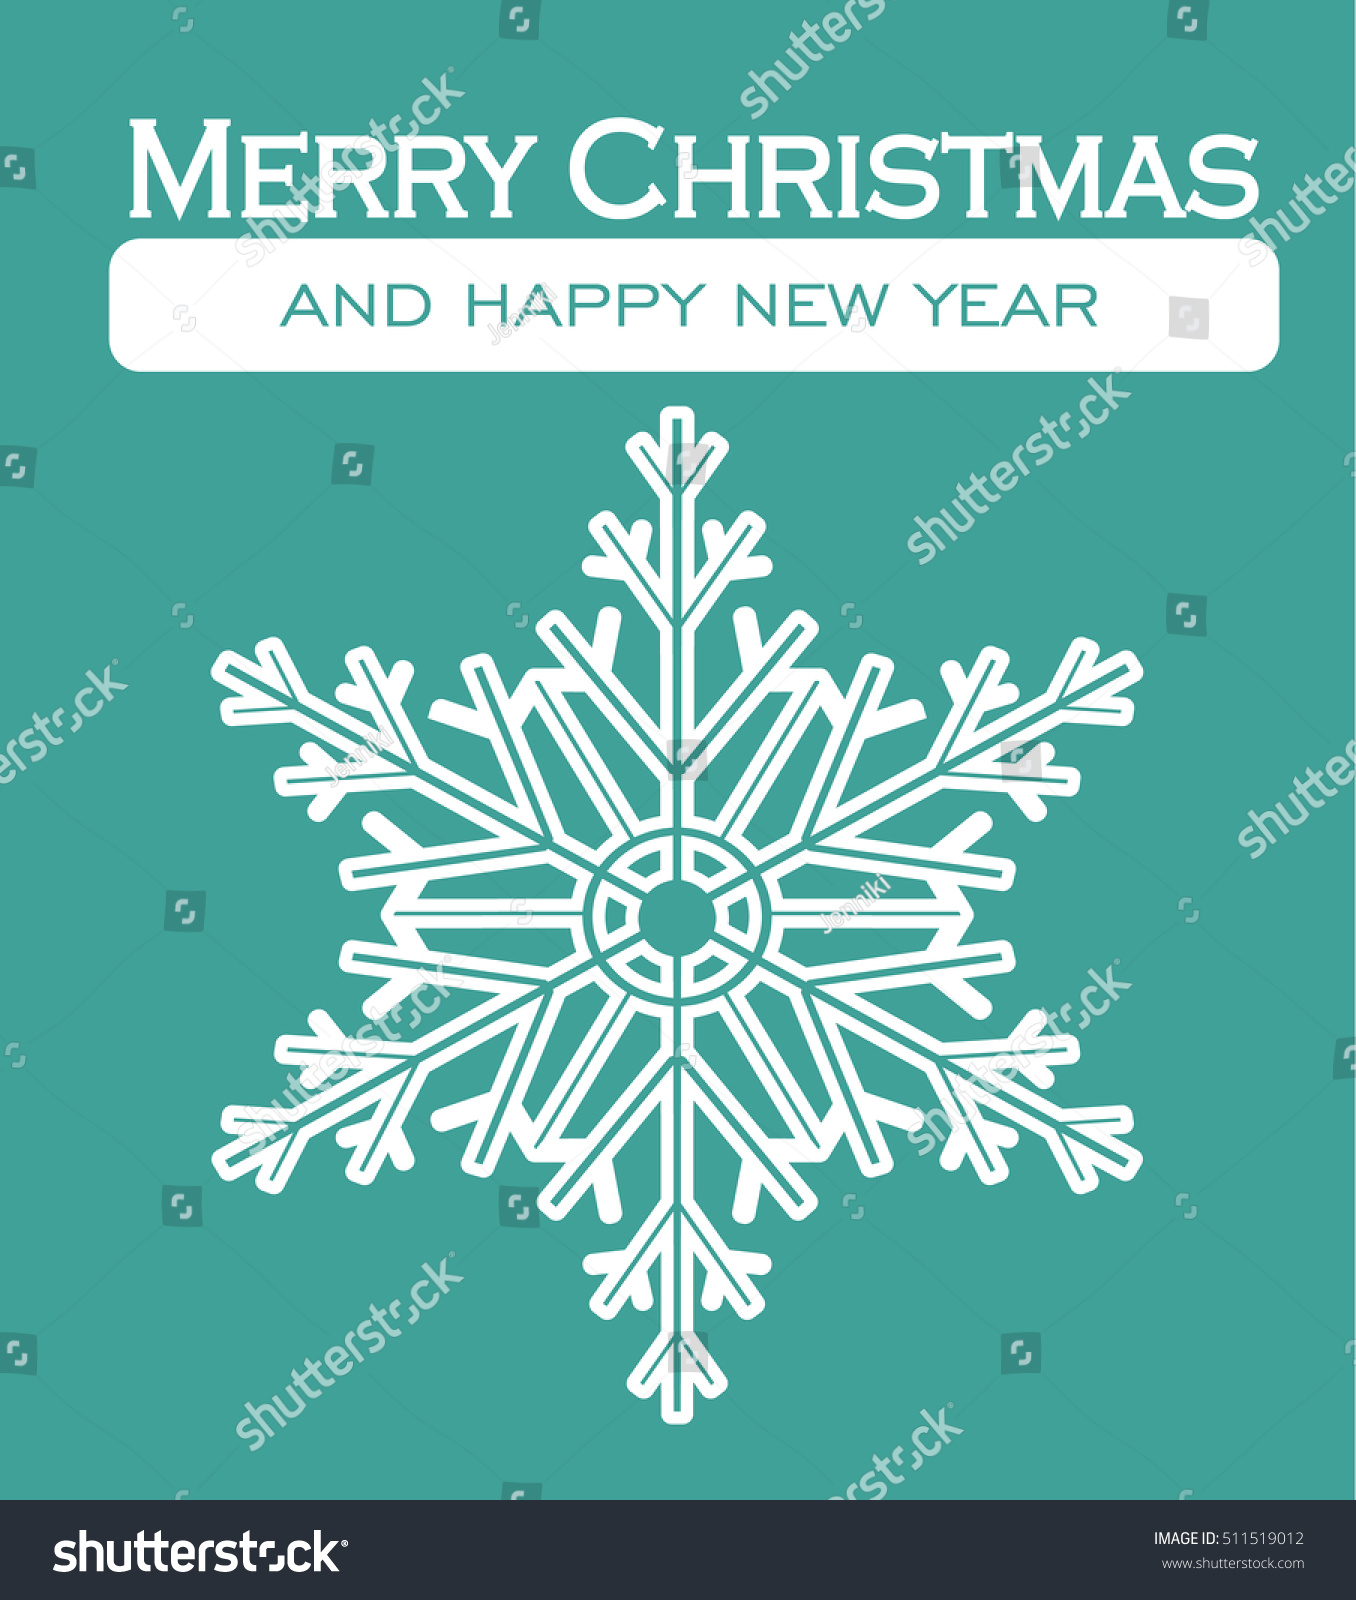 Christmas Card Merry Christmas Happy New Stock Vector 511519012 - Shutterstock